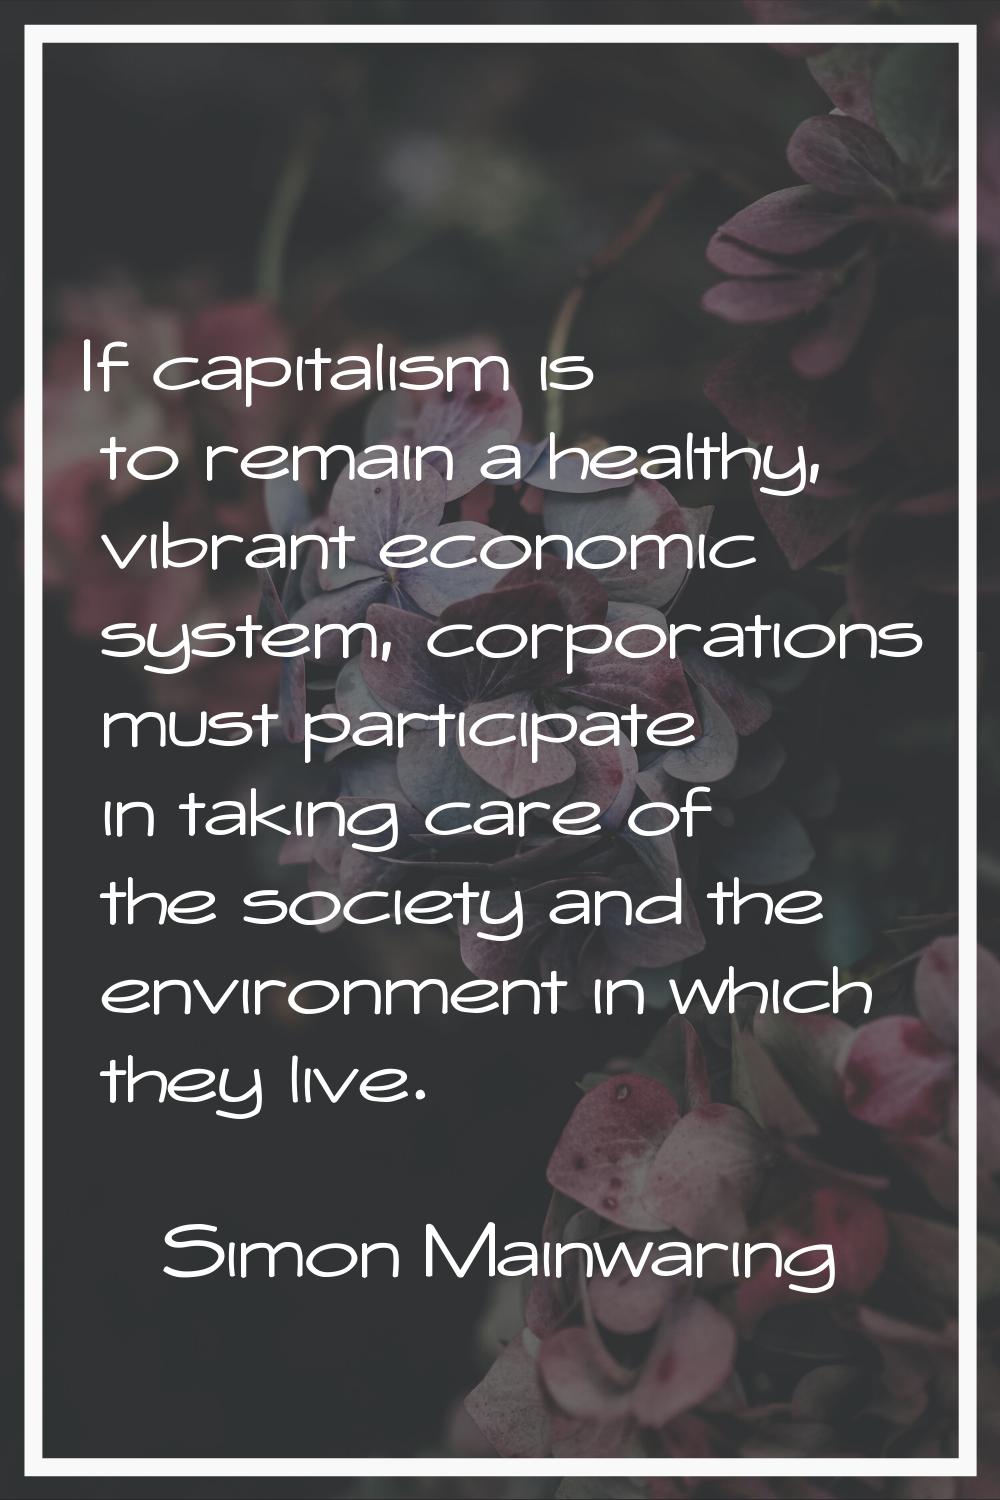 If capitalism is to remain a healthy, vibrant economic system, corporations must participate in tak